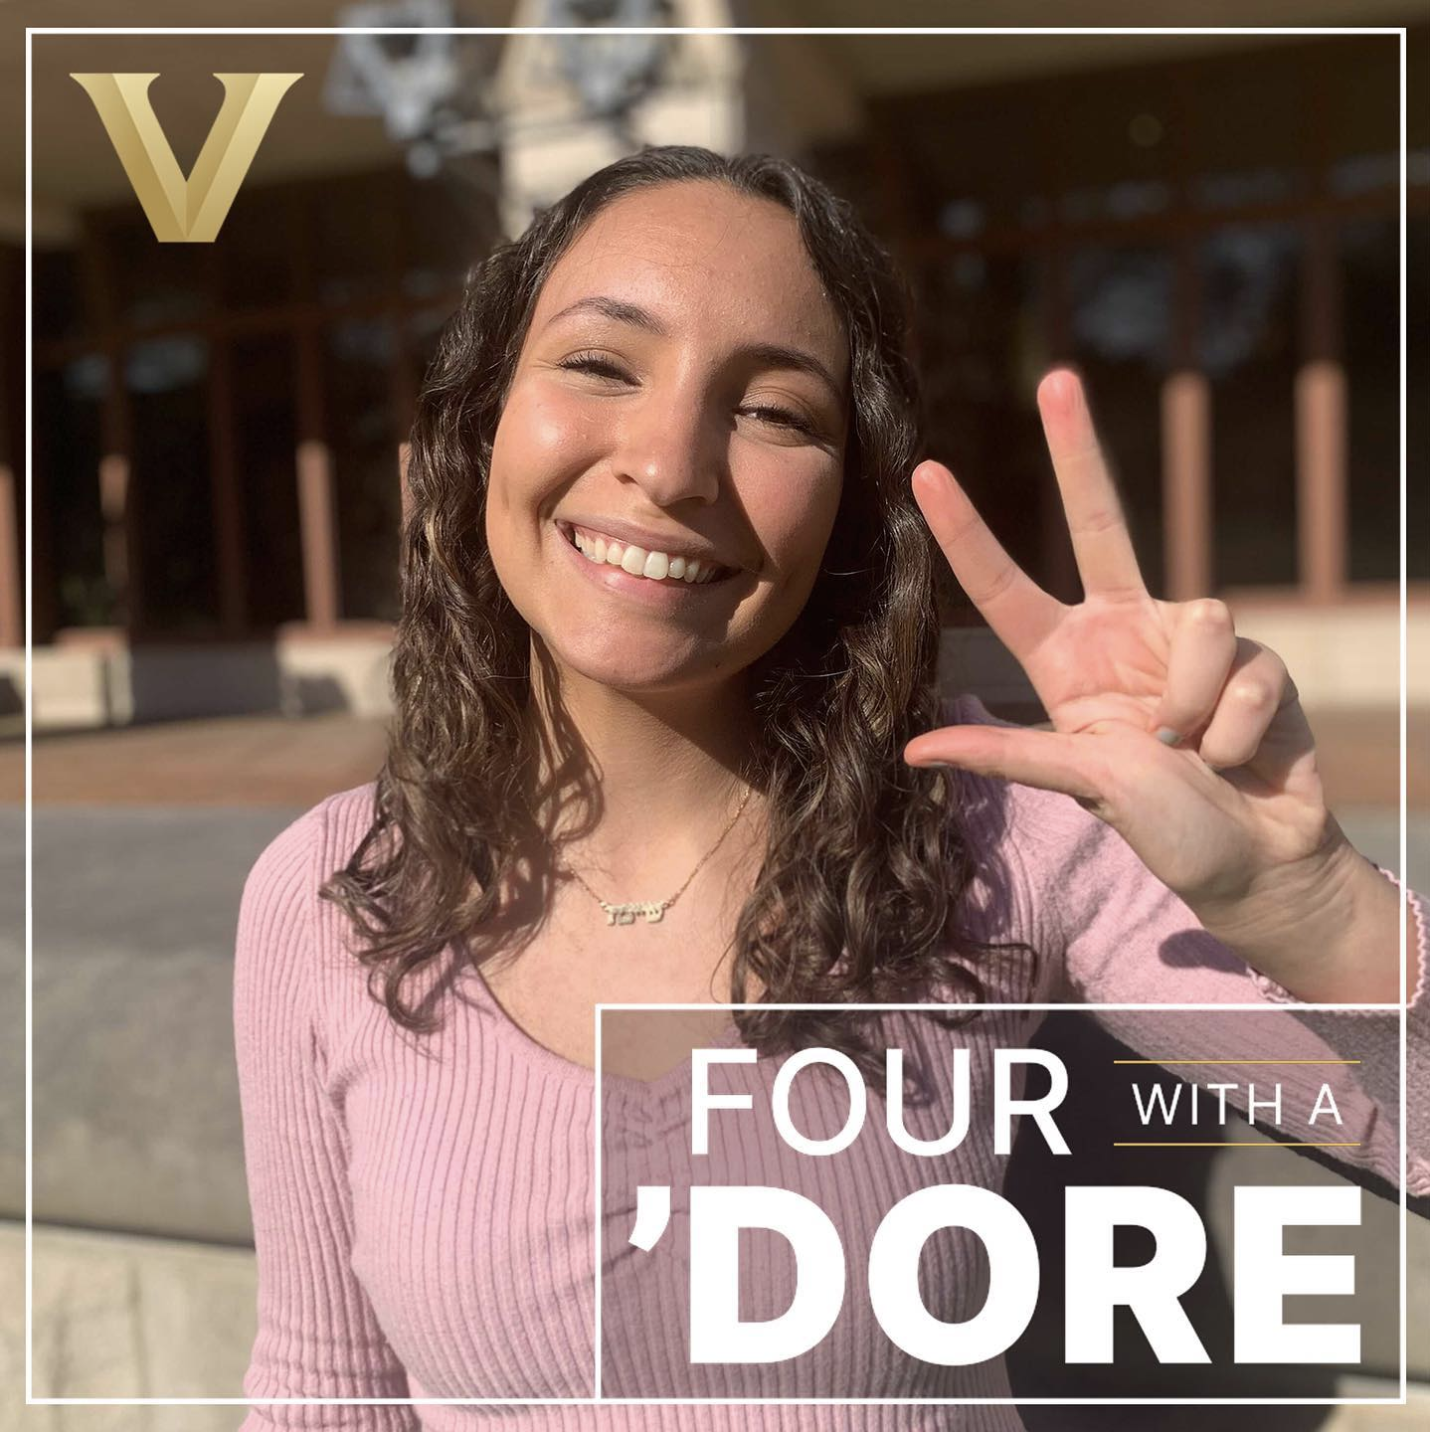 Student Jeanette Hurwitz showing the VU hand sign outside